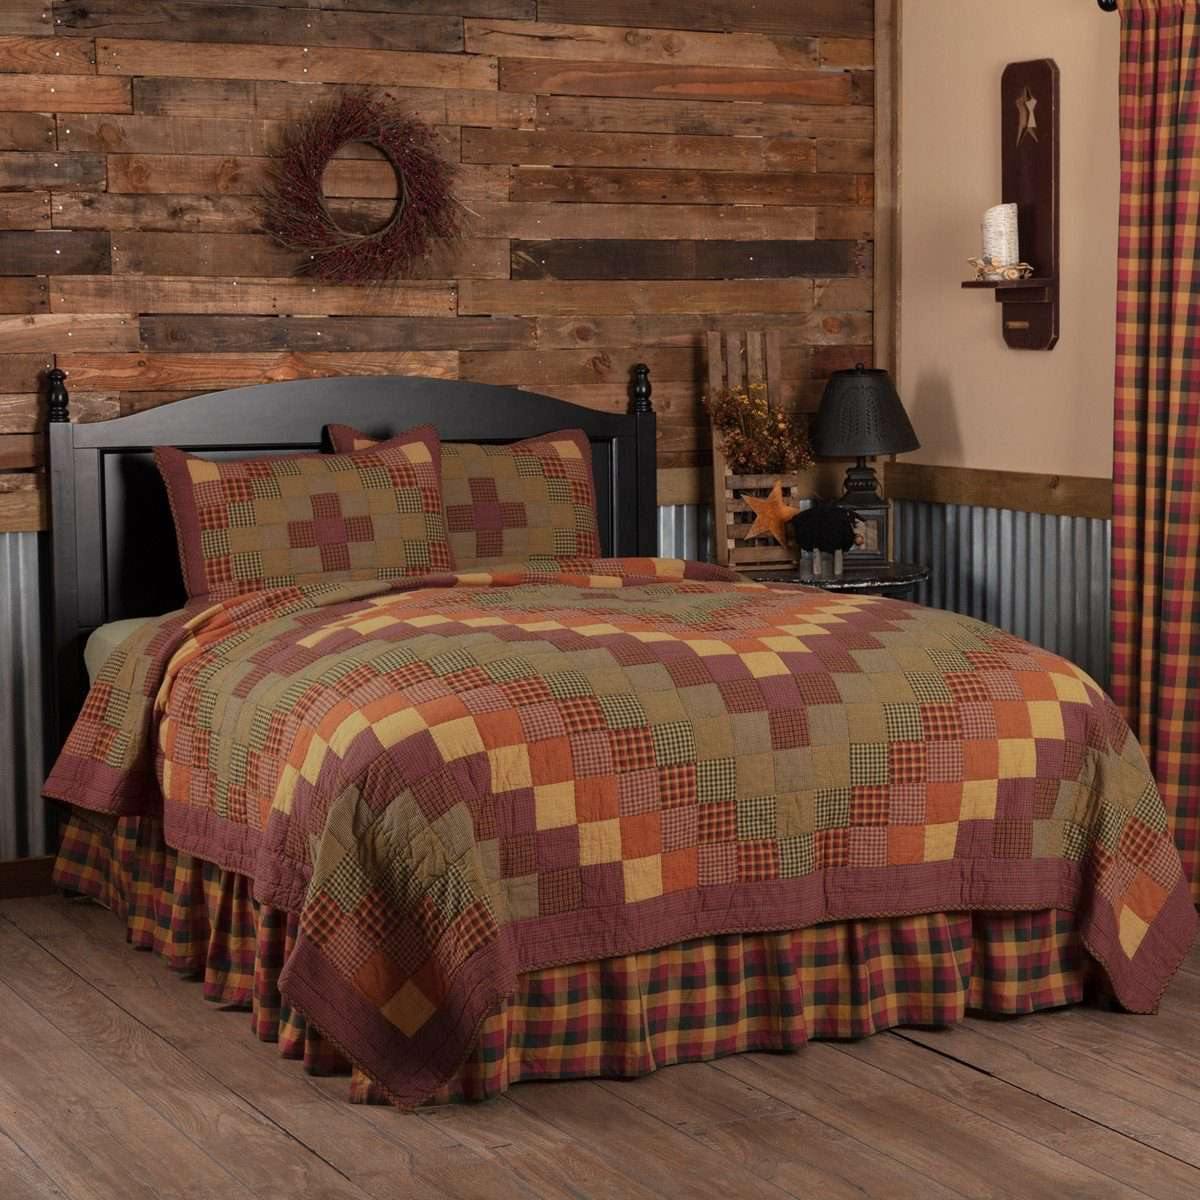 Heritage Farms California King Quilt Set; 1-Quilt 130Wx115L w/2 Shams 21x37 VHC Brands